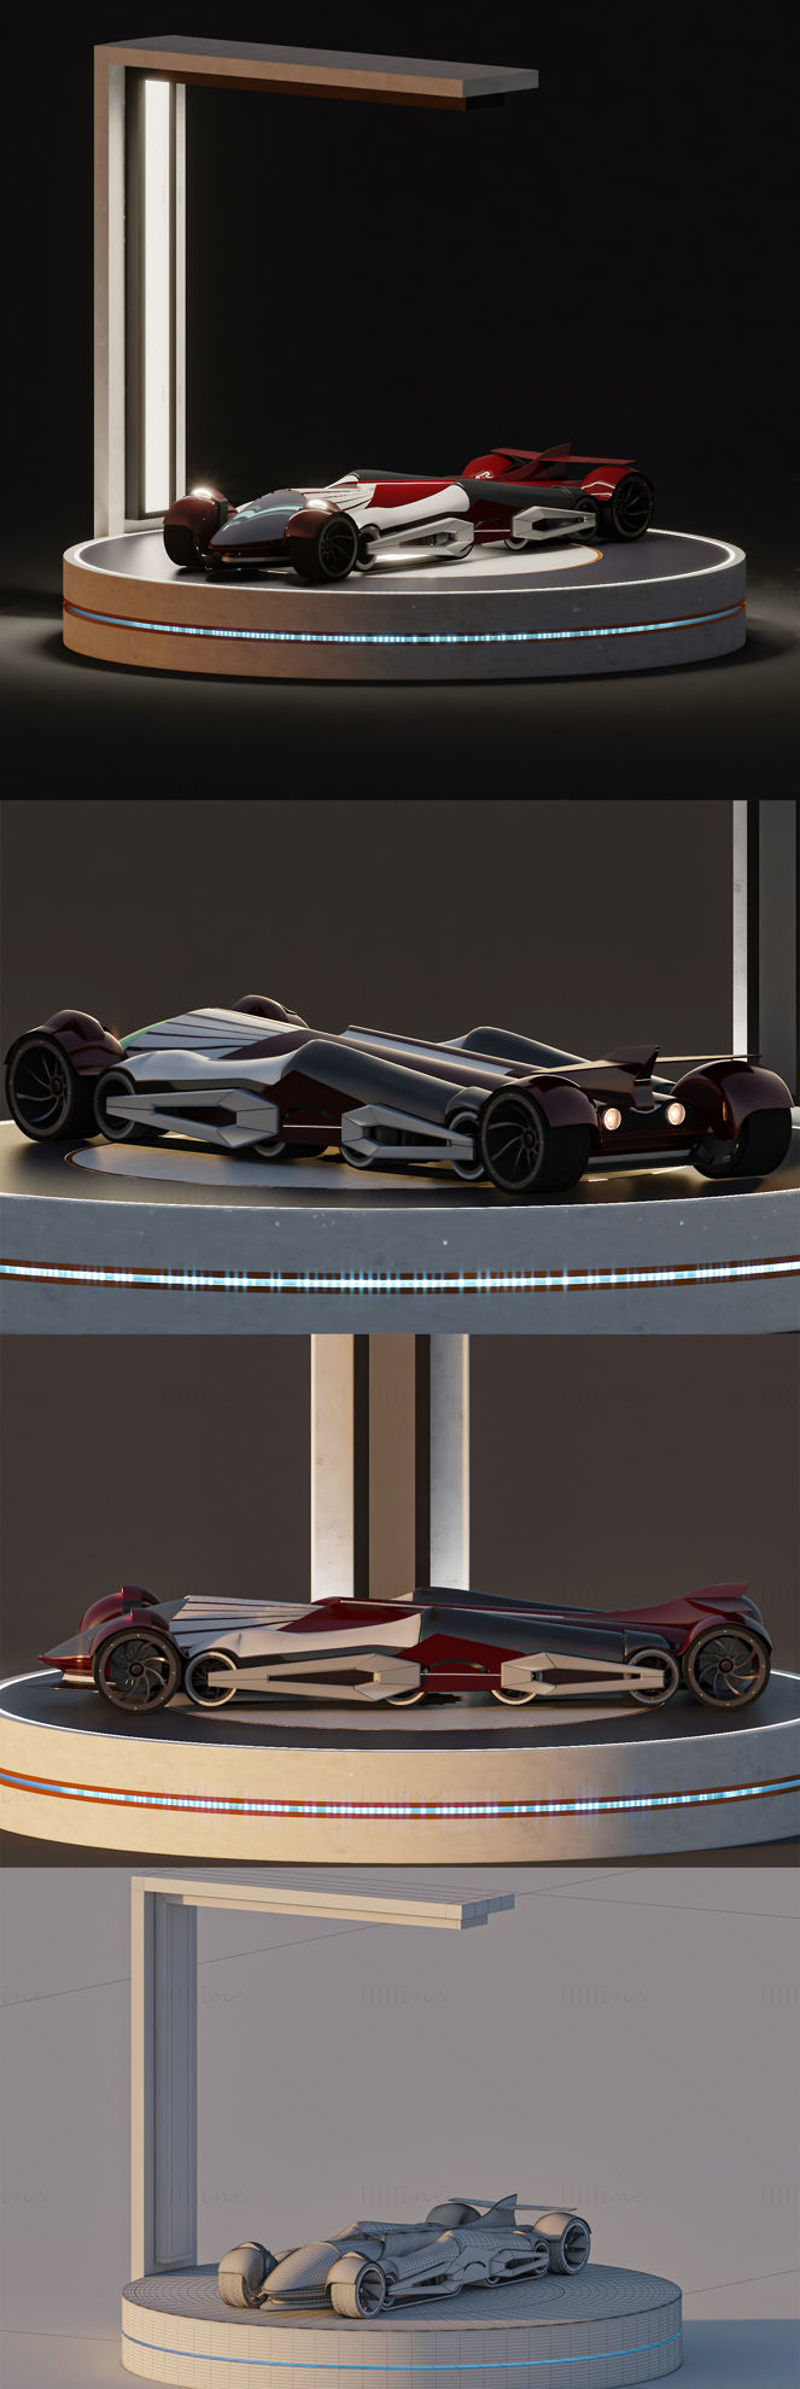 Concept sports car + booth 3D model scene